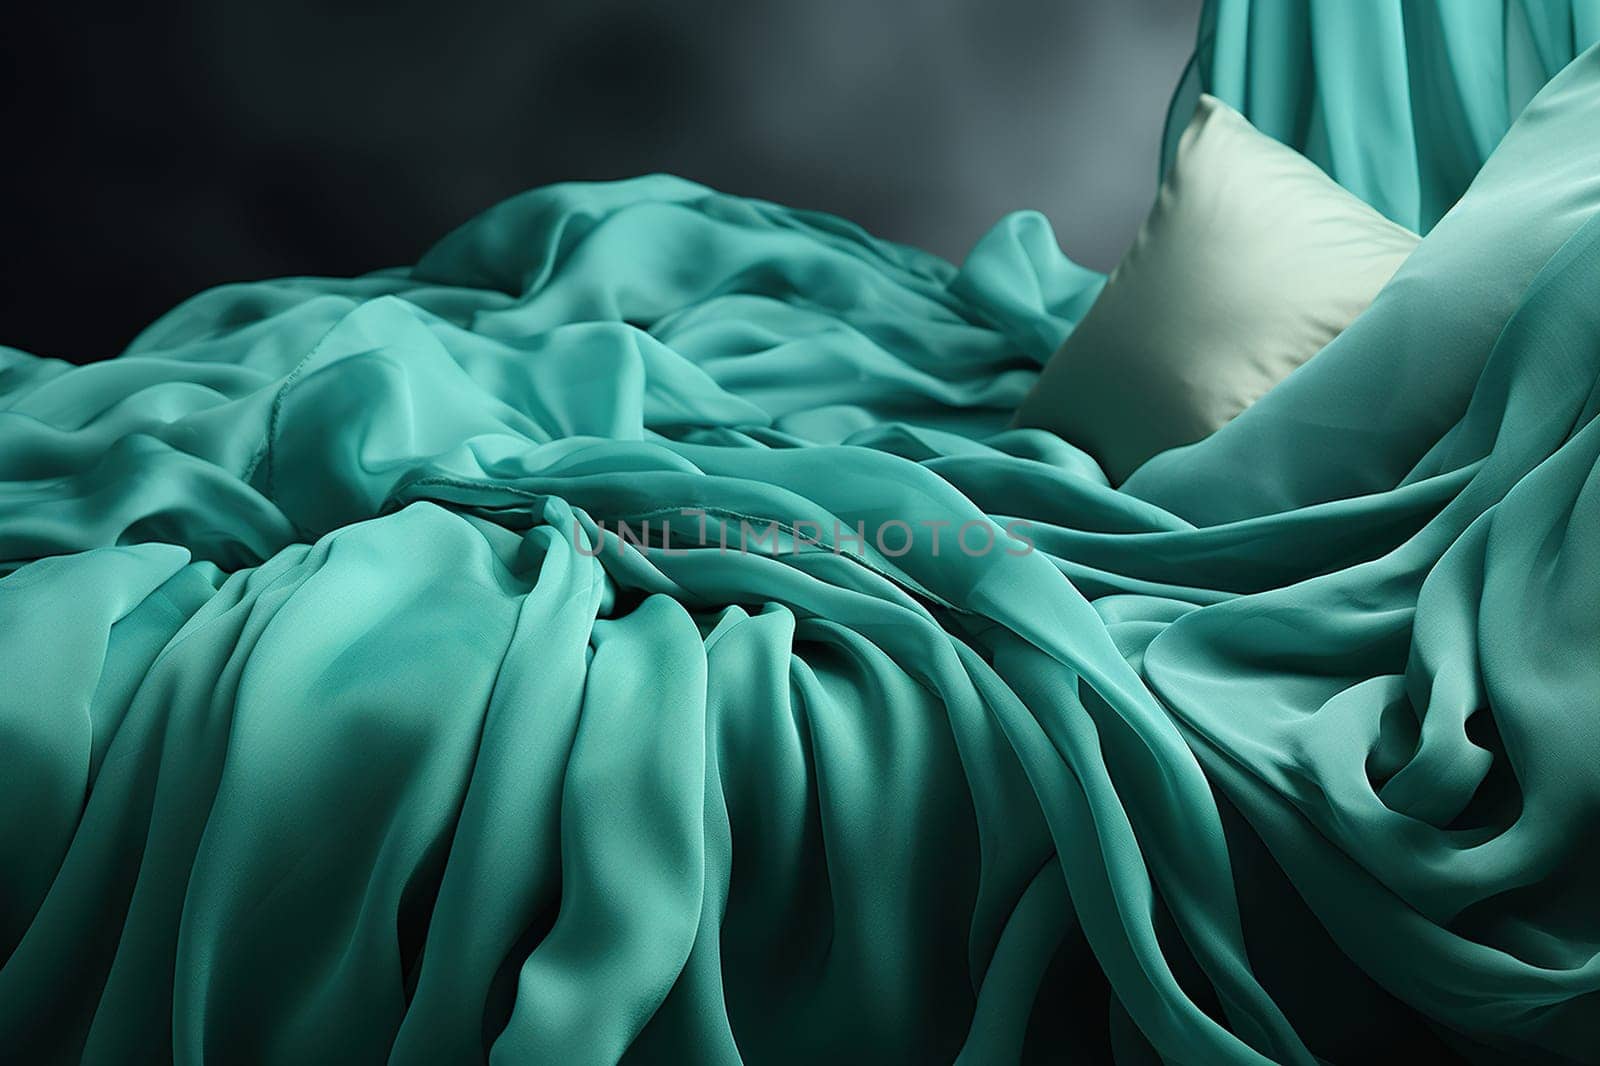 Background with sea green bedding. Fashionable natural shades in home textiles.